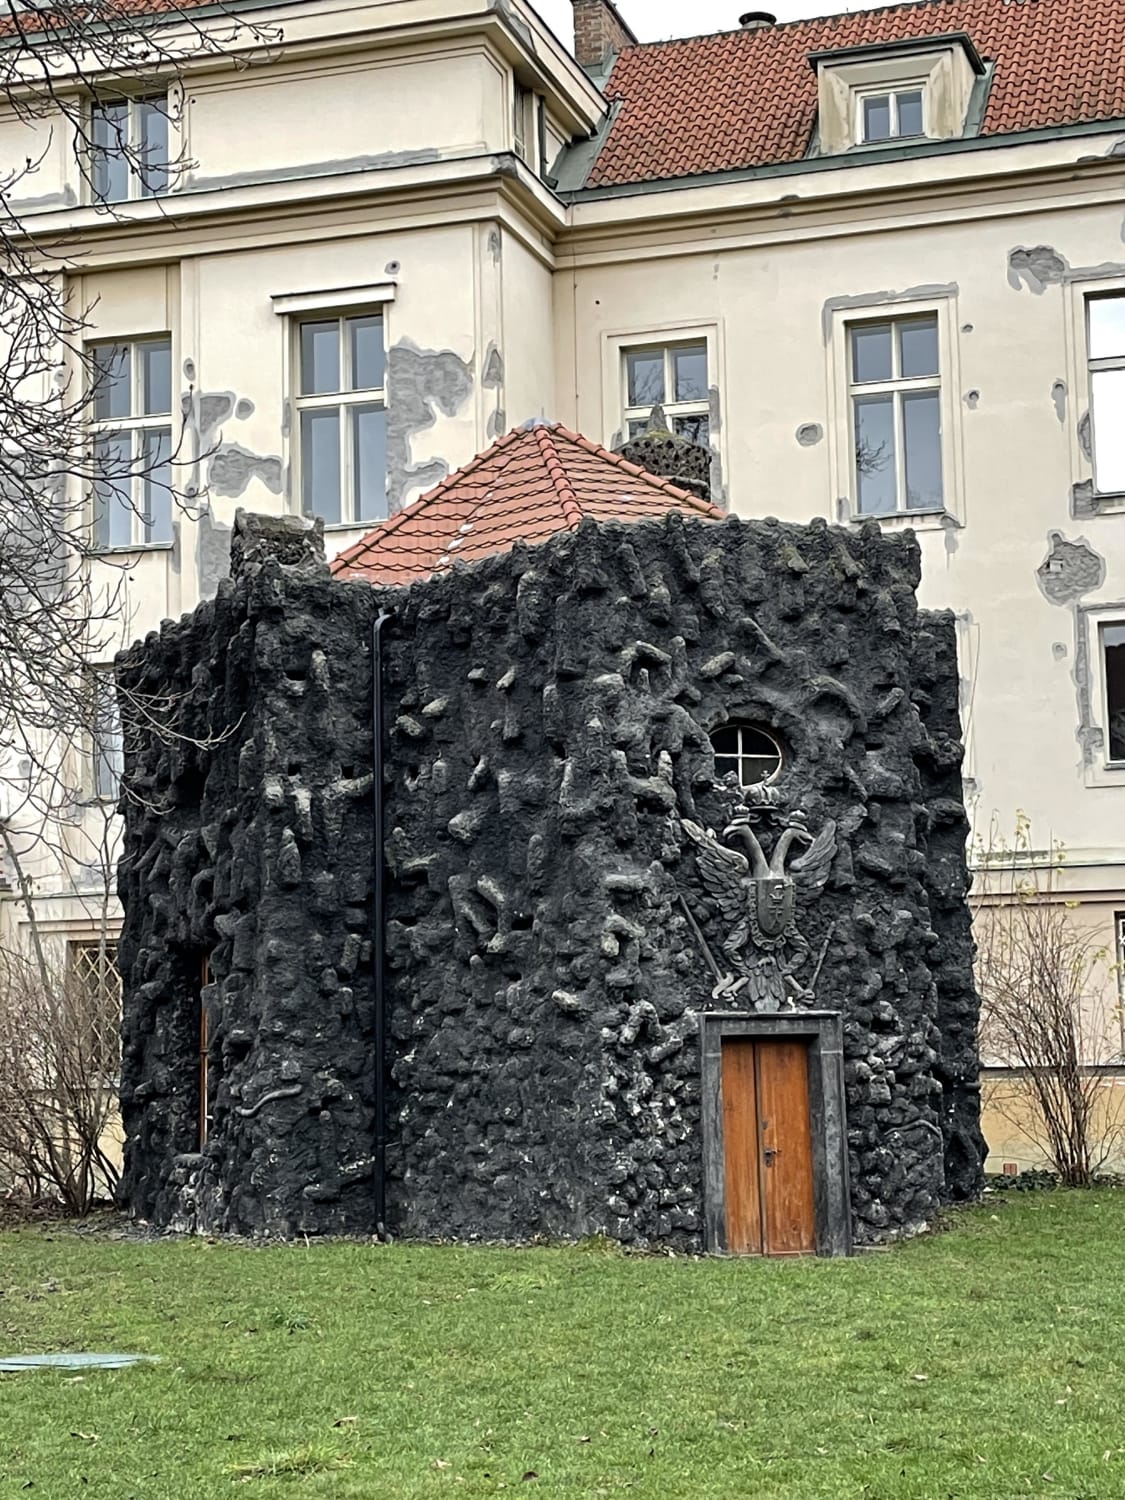 Looks like a witch’s hut